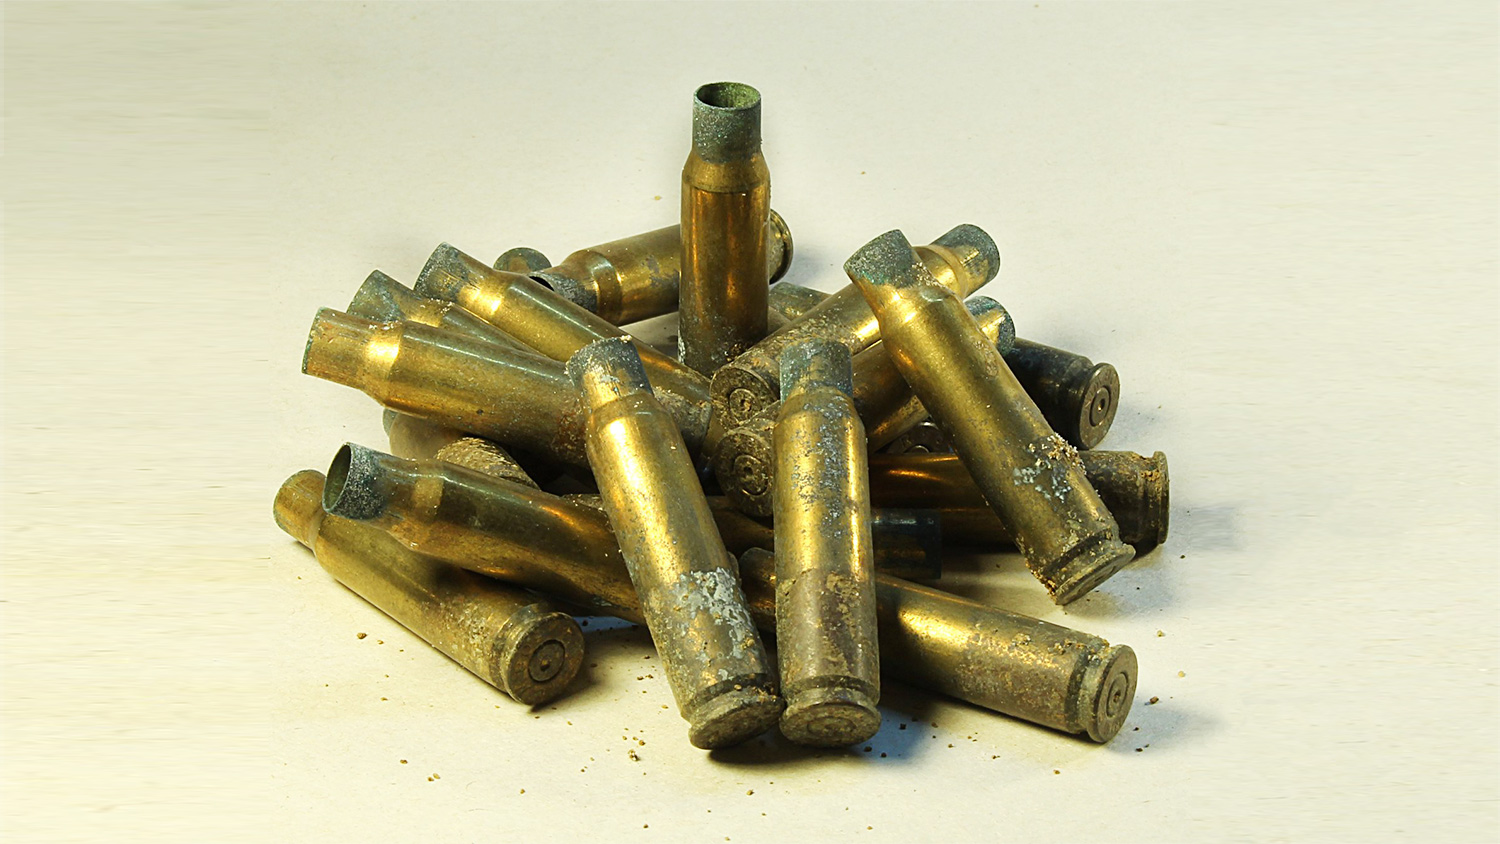 44 Mag, Spent Brass Bullet Casings, 15 pieces, Used Bullet Shells